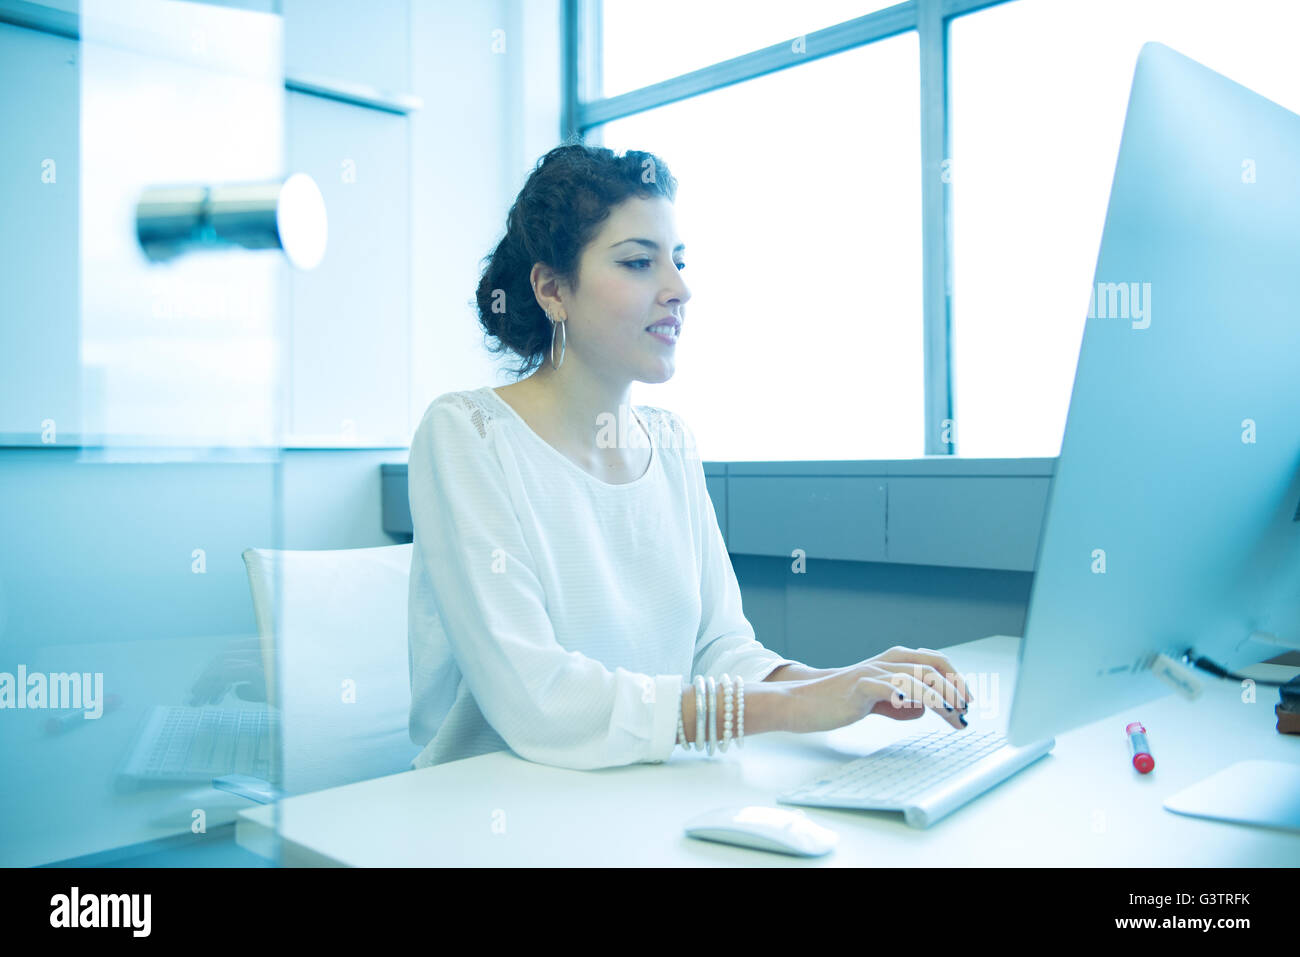 A professional woman sitting in front of a computer in an office environment. Stock Photo